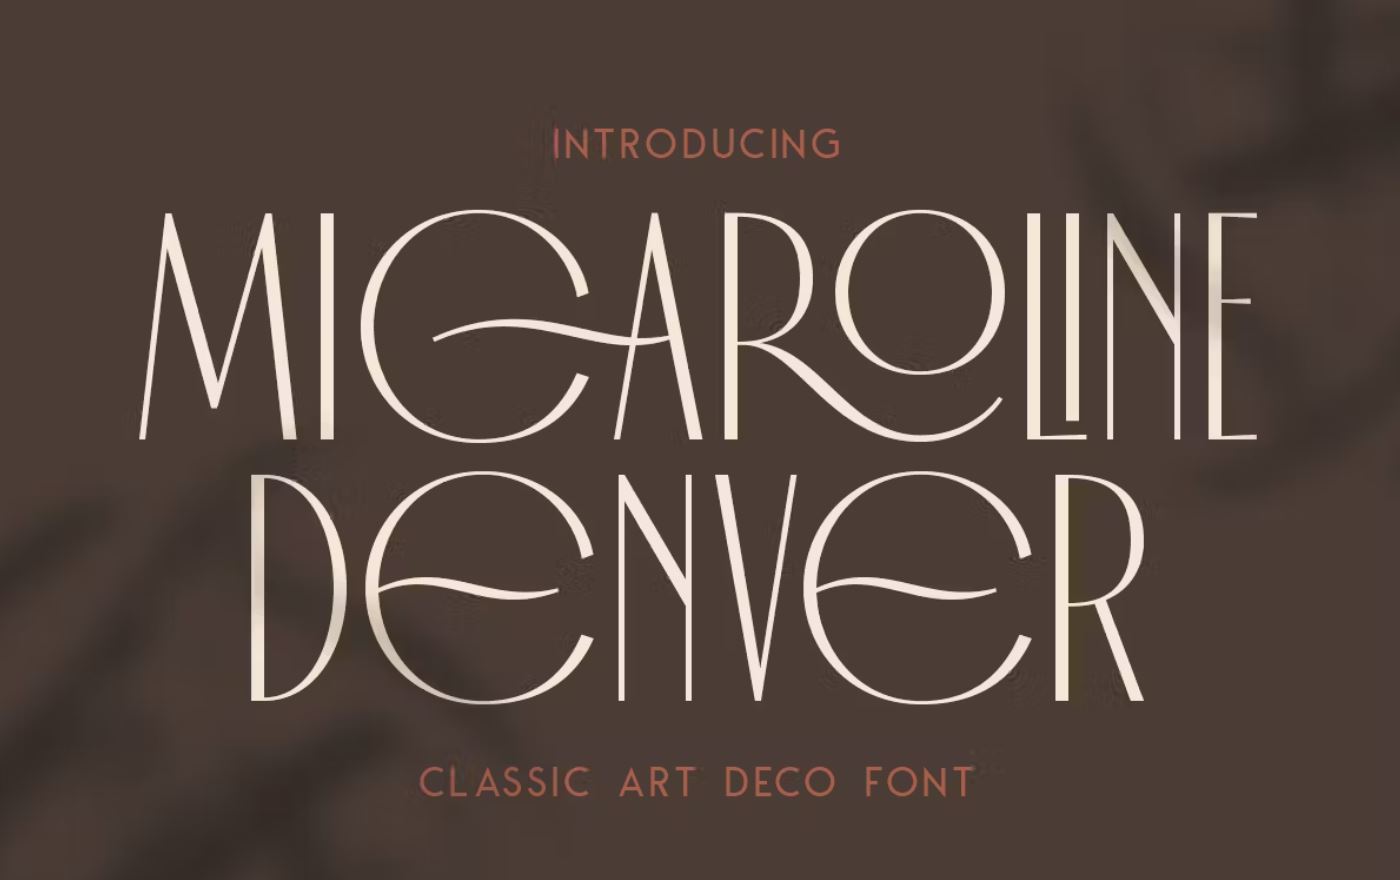 Classic and Traditional Typeface to Give Art Deco Look to Templates